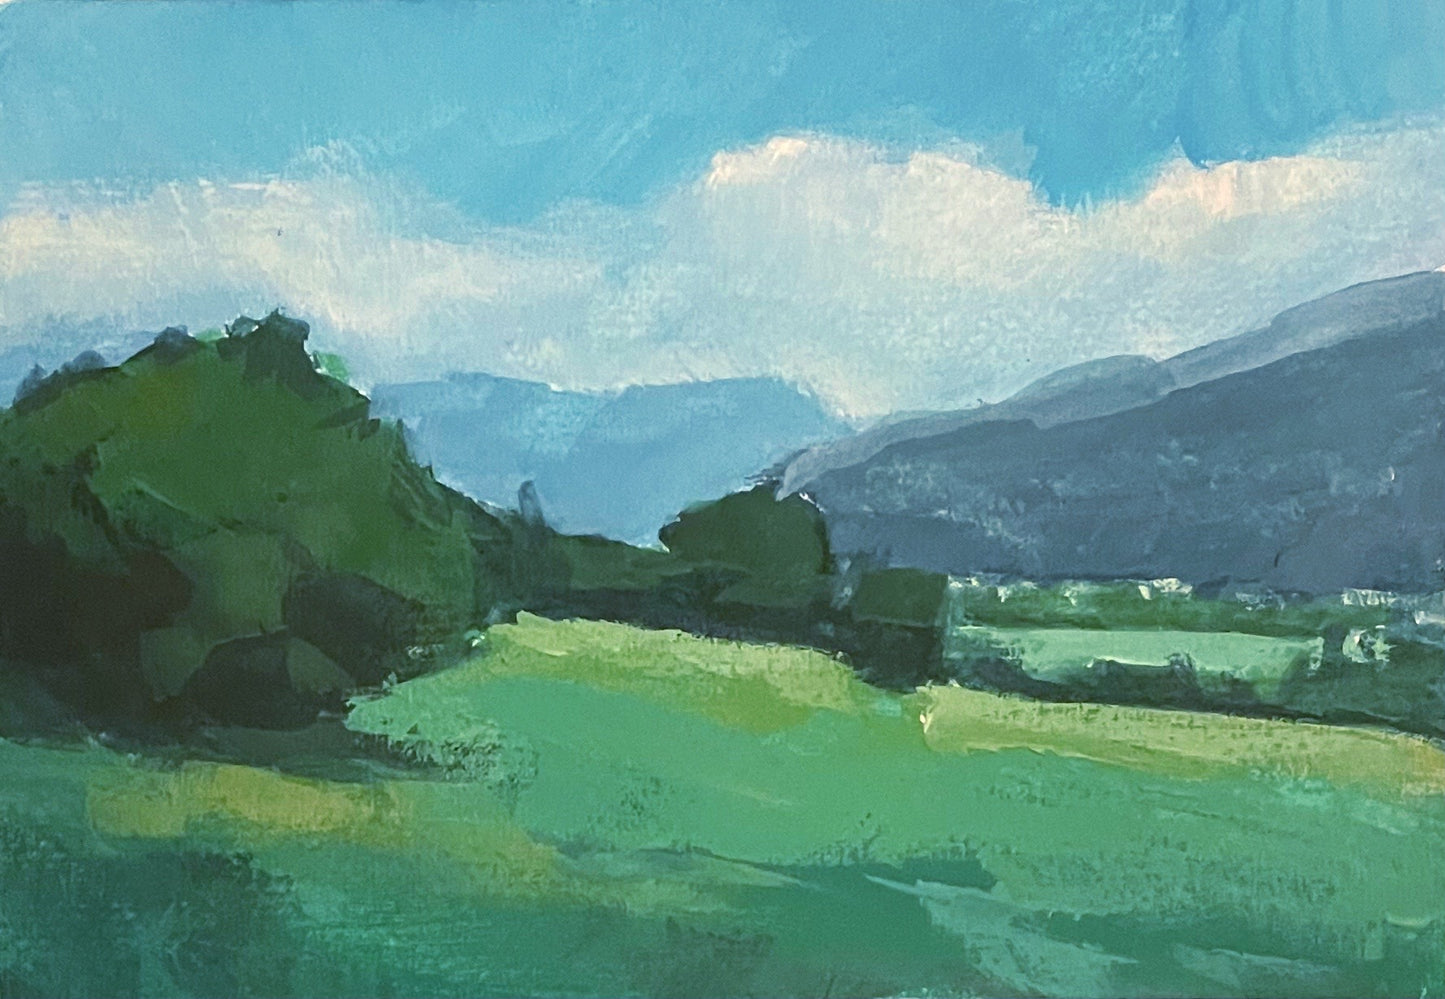 “Emerald Valley”- 5x7" gouache on paper